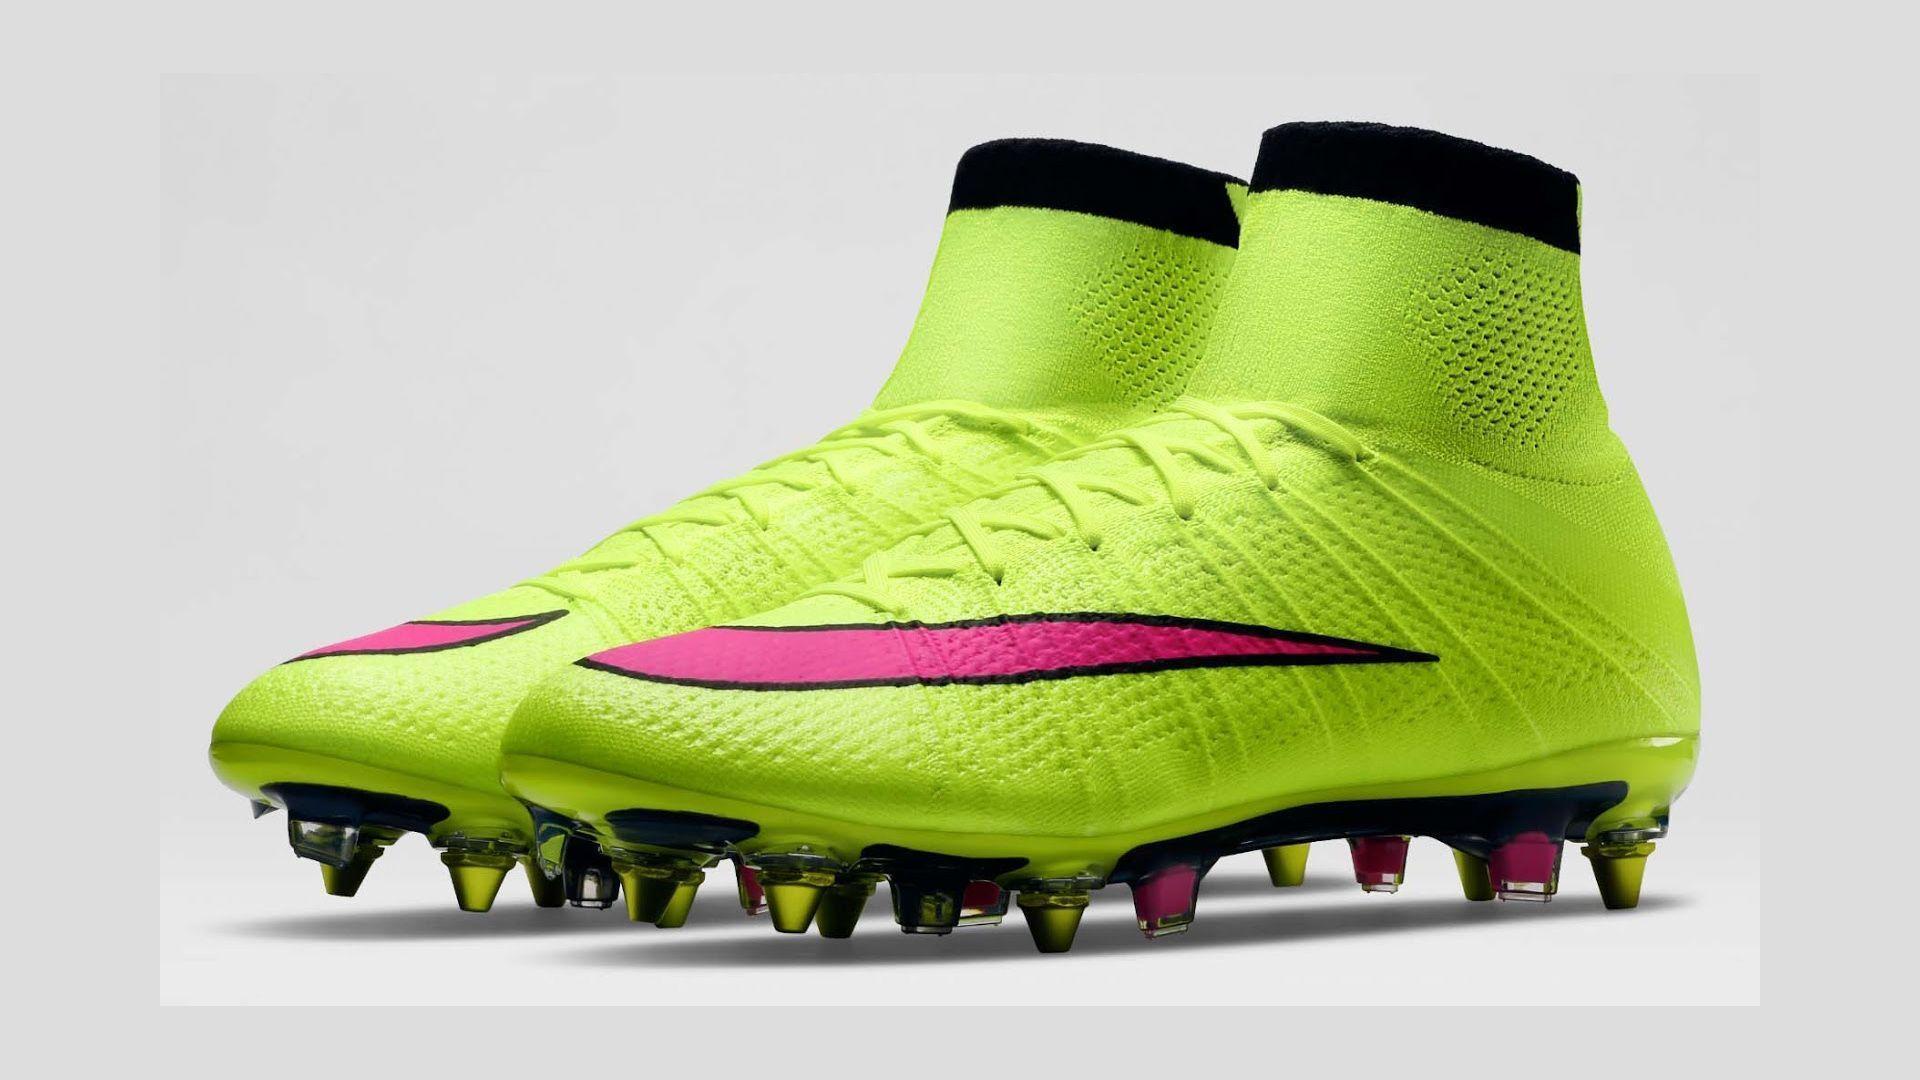 Volt Nike Mercurial Superfly 2015 Football Boots Wallpaper Wide or